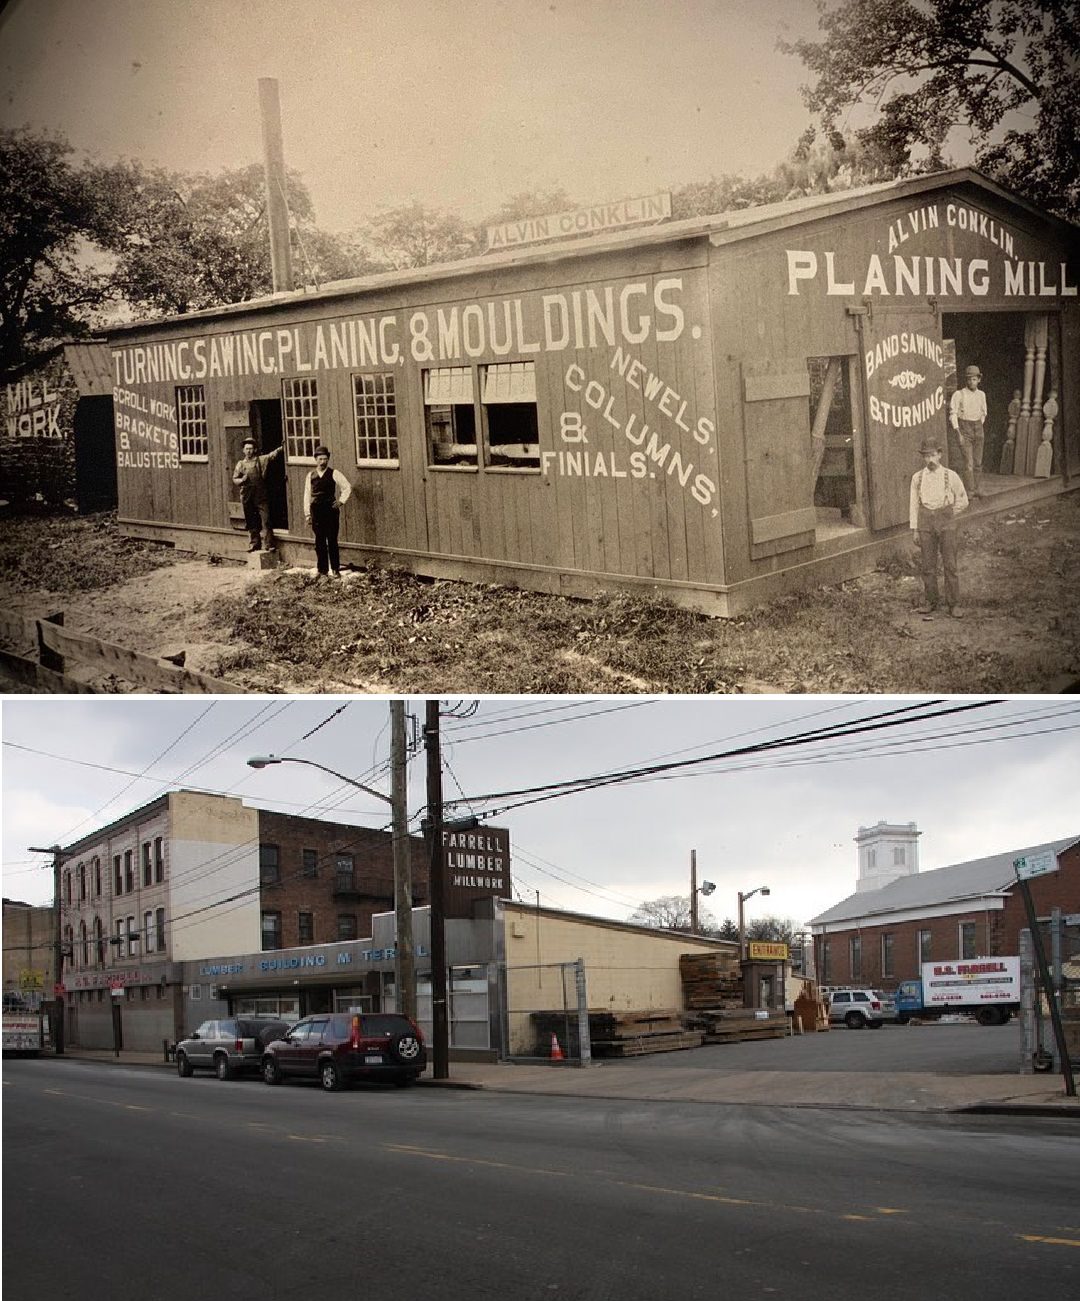 The Alvin Conklin Planing Mill, Once Situated On Richmond Terrace In Port Richmond, Later Became Farrell Lumber And Is Now Closed.